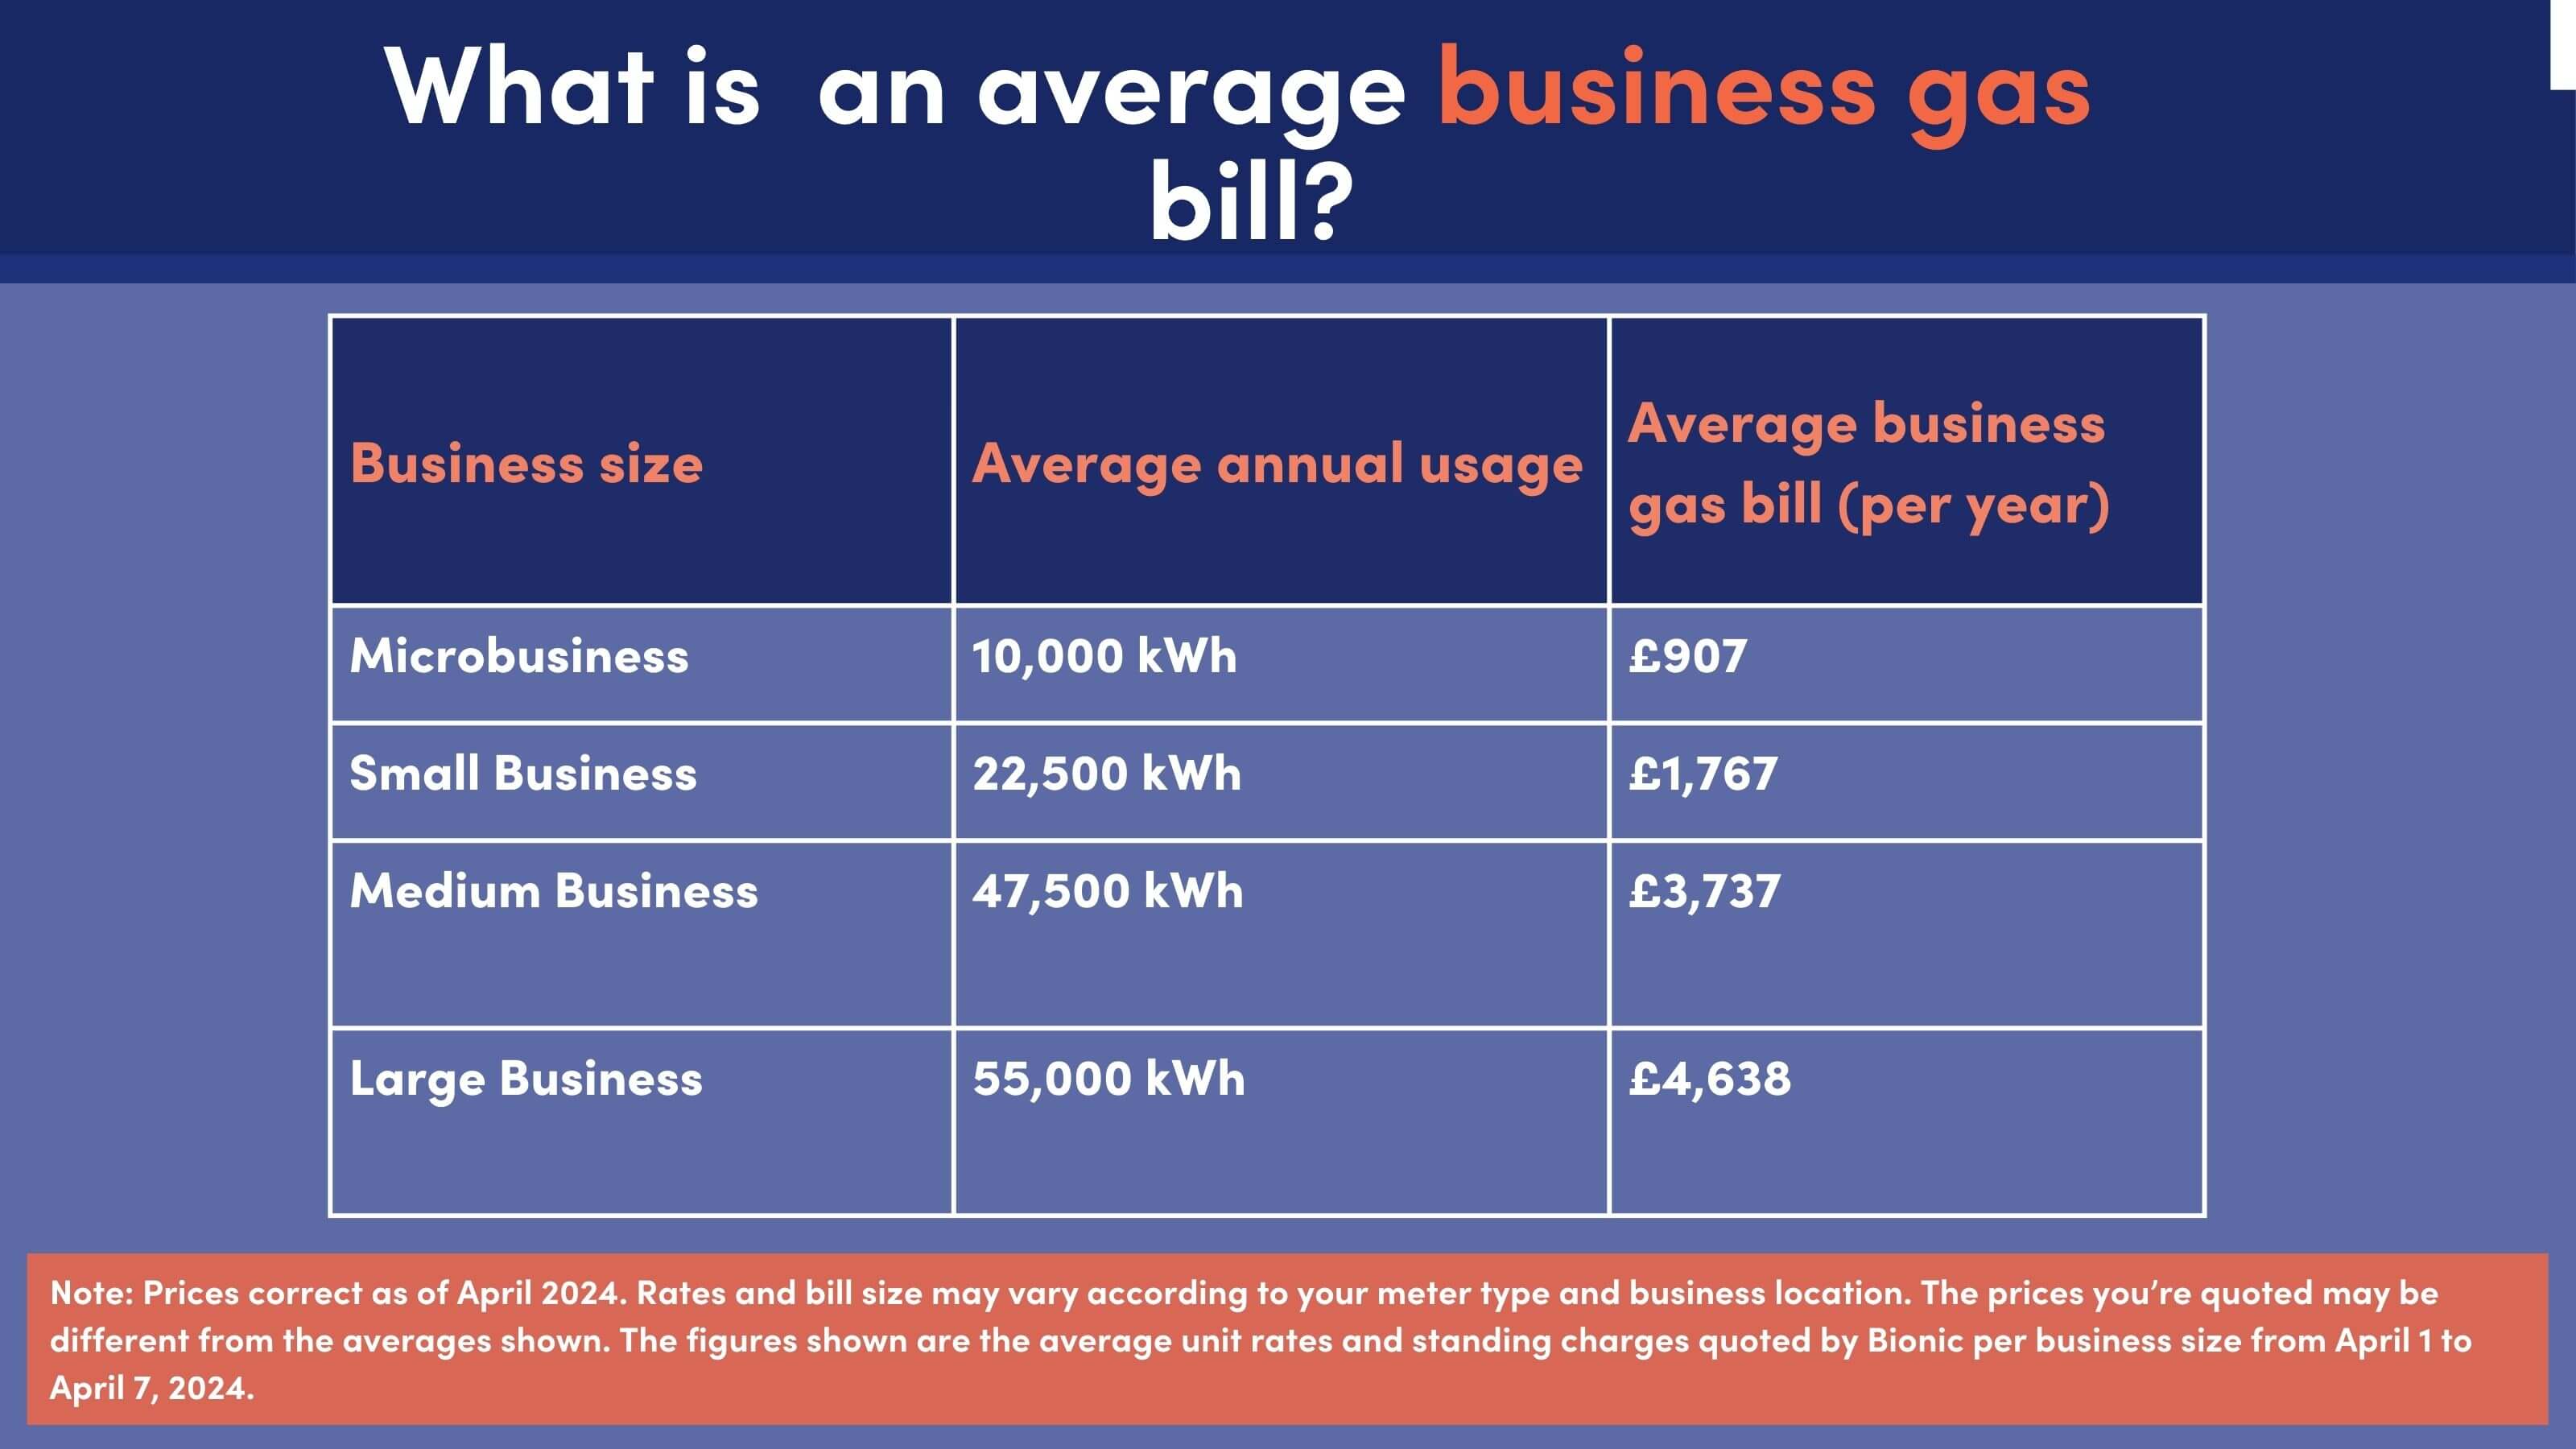 Average business gas bill rates for different sized businesses